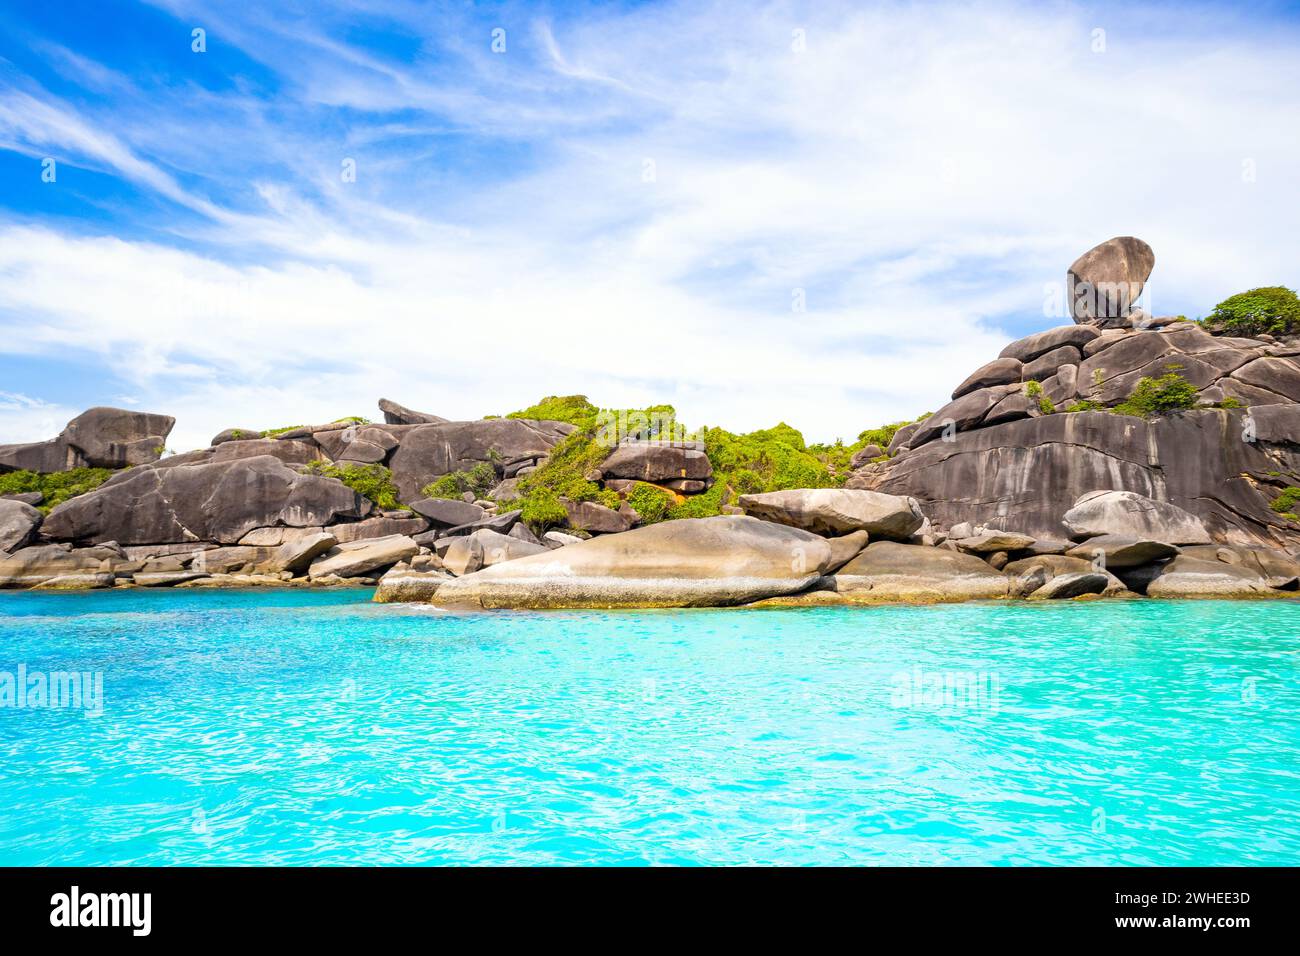 The rocky shore of the Similan Islands in Thailand - most famous islands with paradise views and snorkeling and diving spots Stock Photo